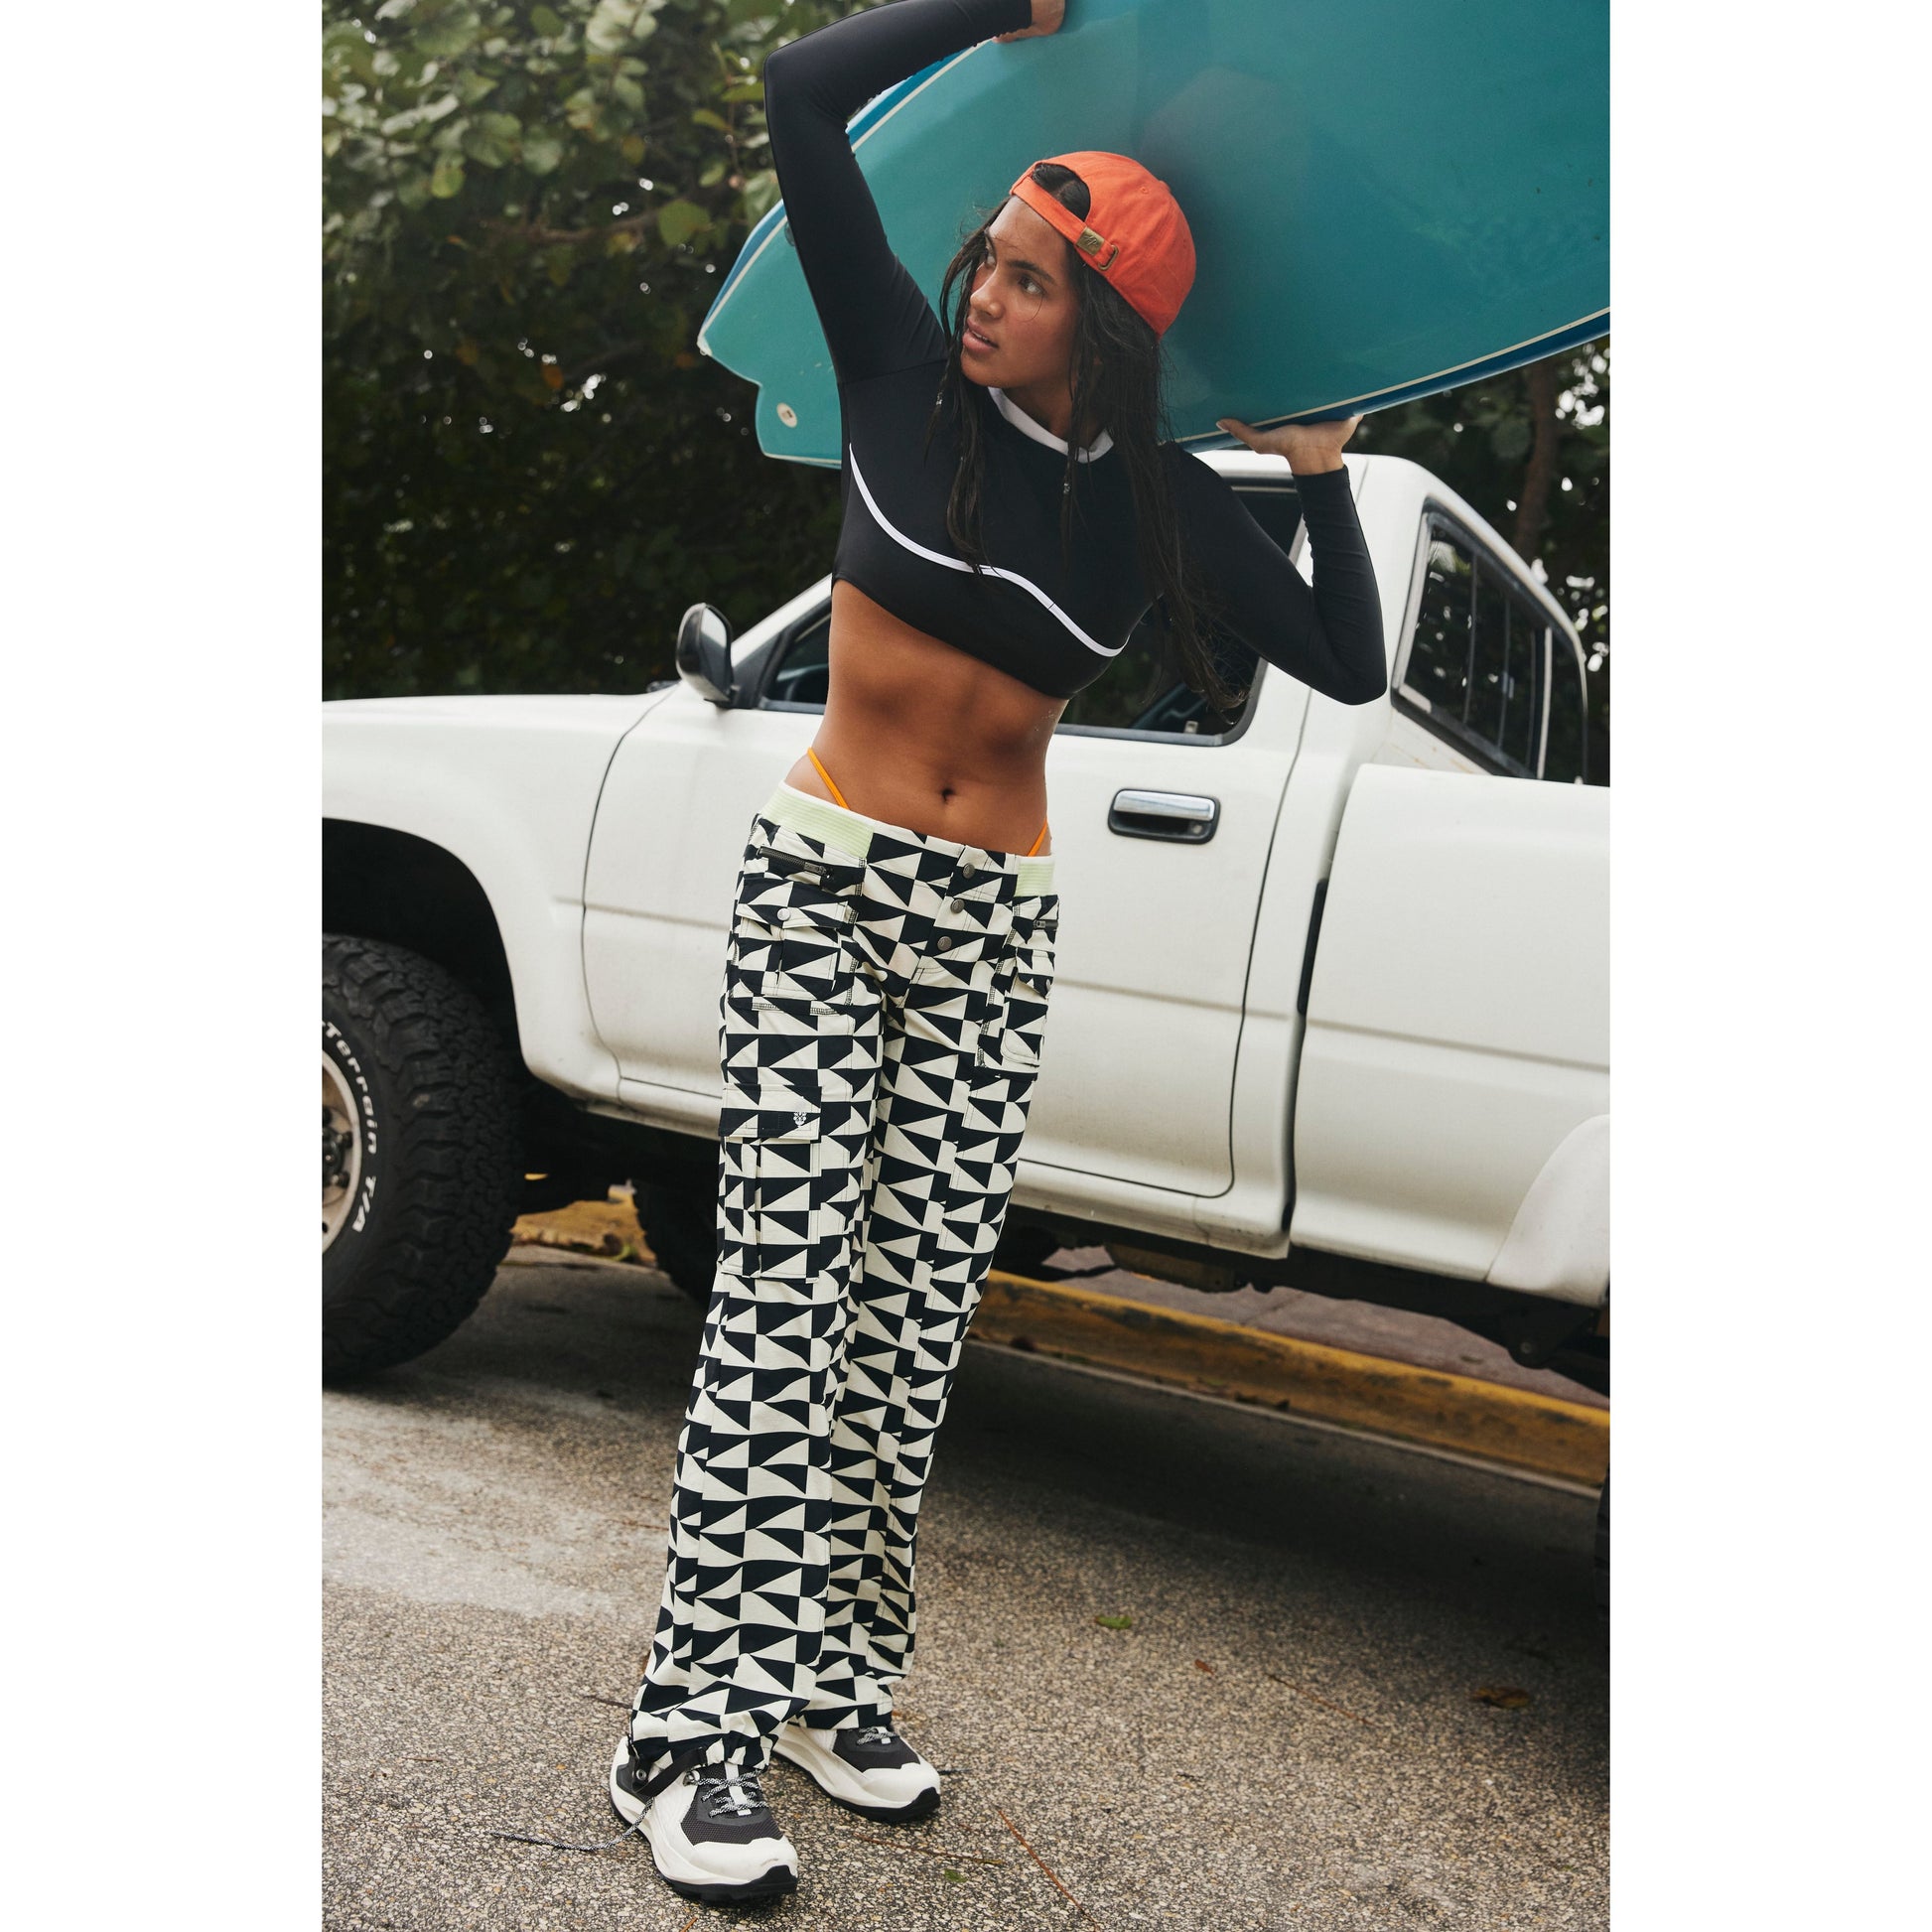 A woman in a Free People Movement sports bra and Off The Grid Combo patterned pants carries a blue surfboard beside a white pickup truck.